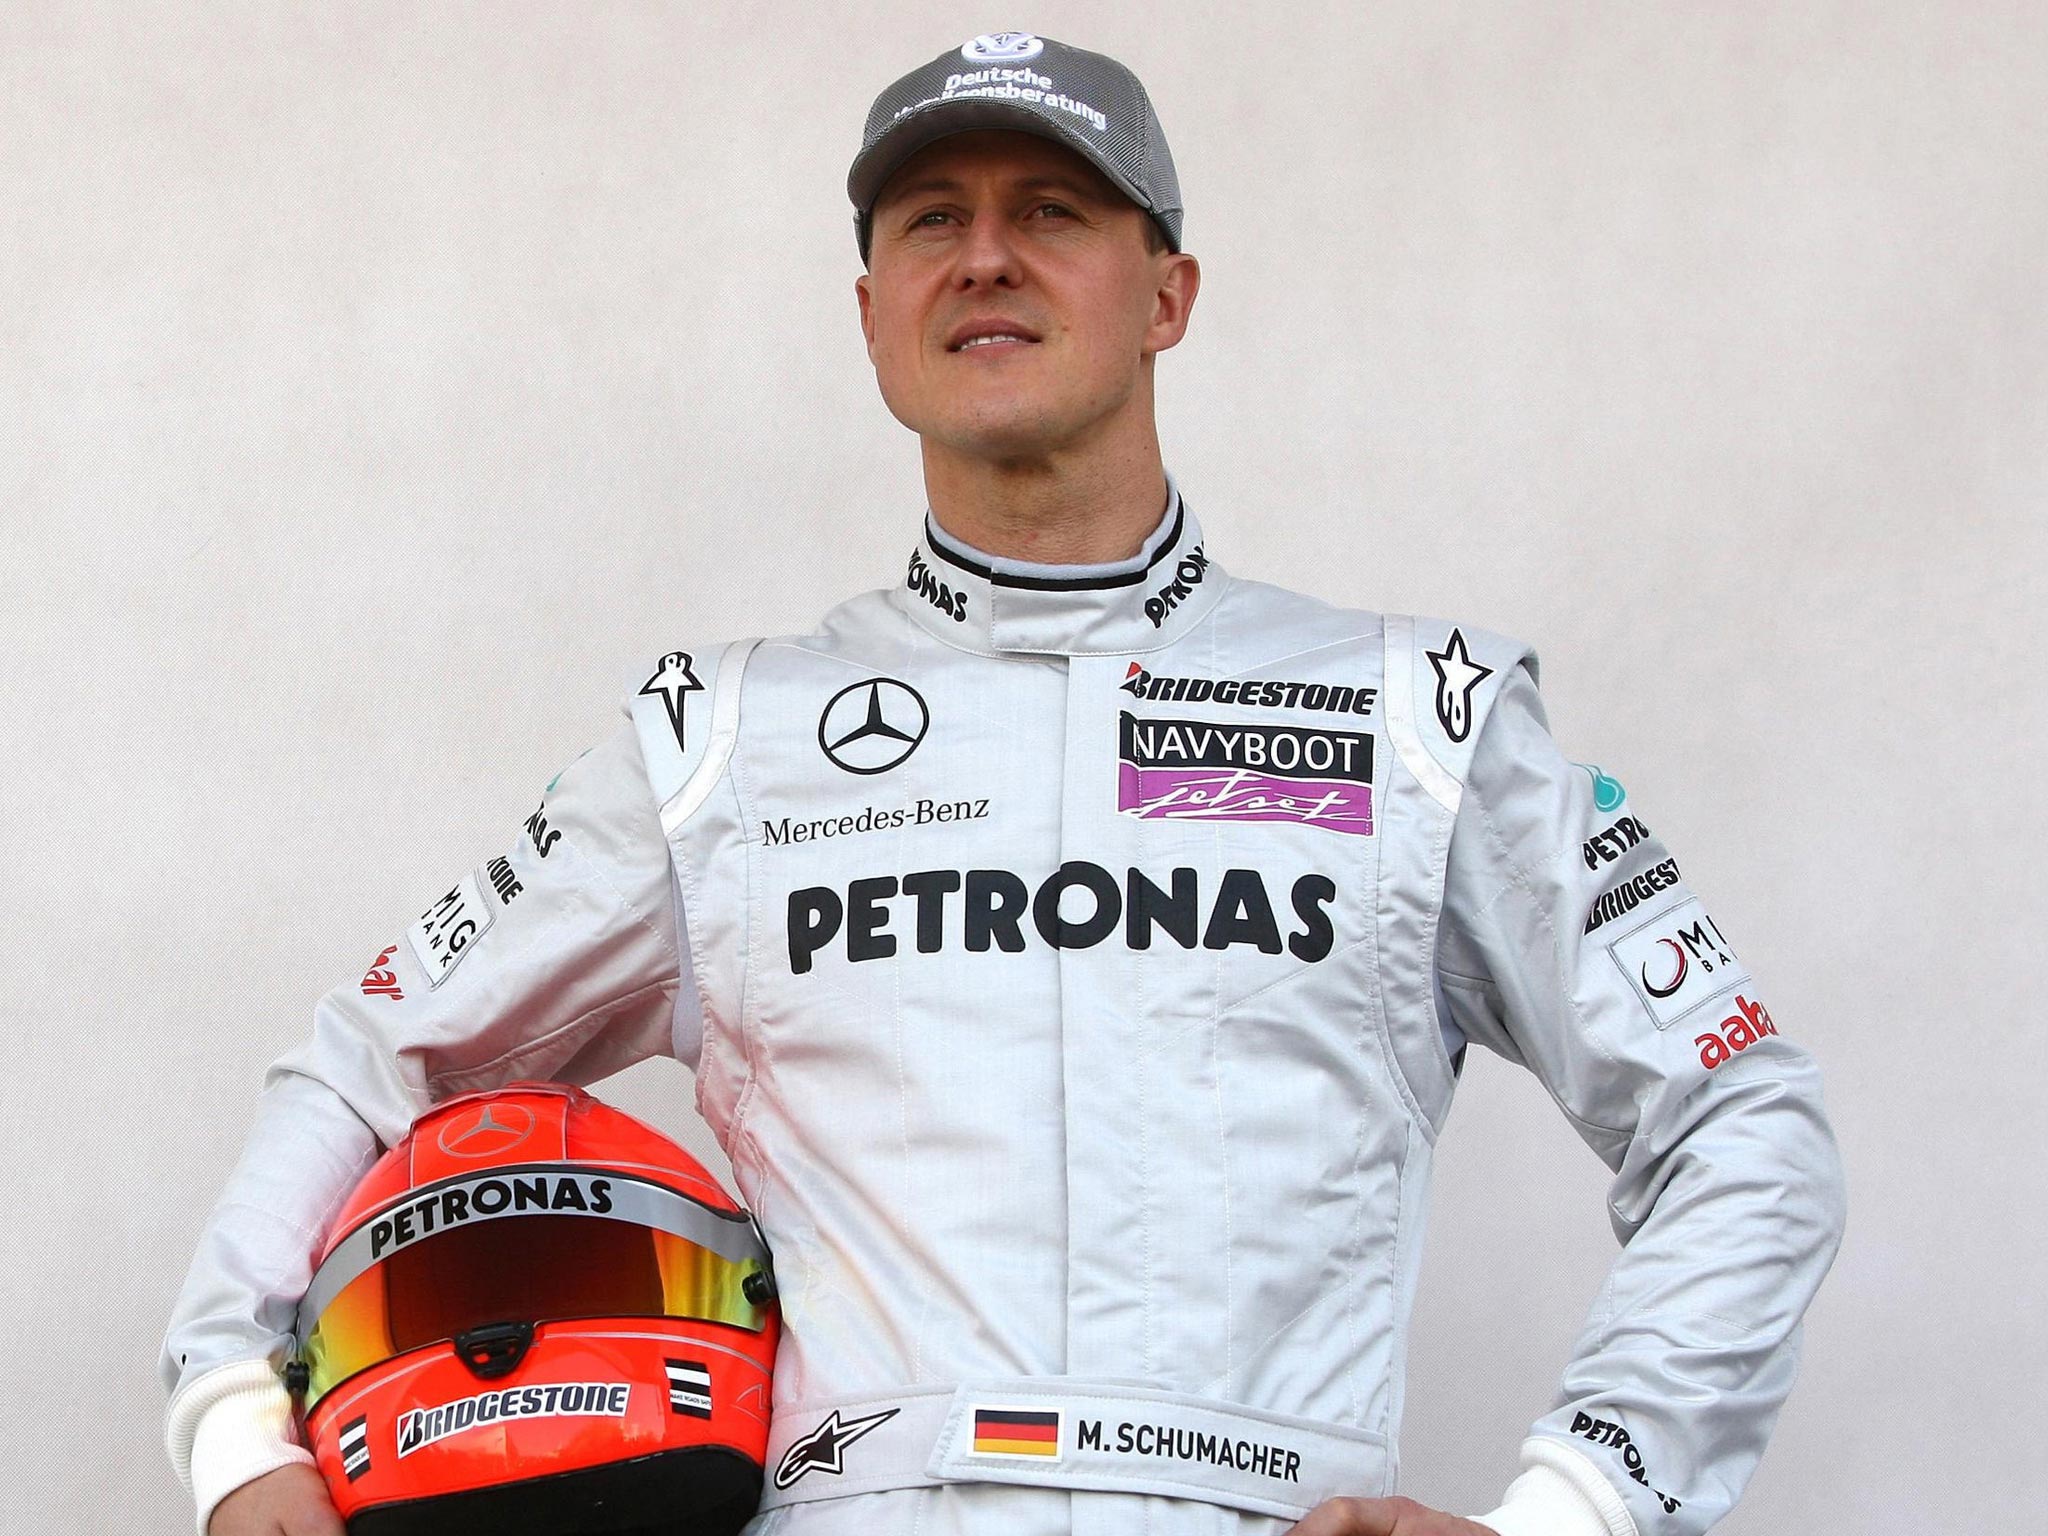 A picture of Michael Schumacher in his bed at home has been leaked and offered for £1m